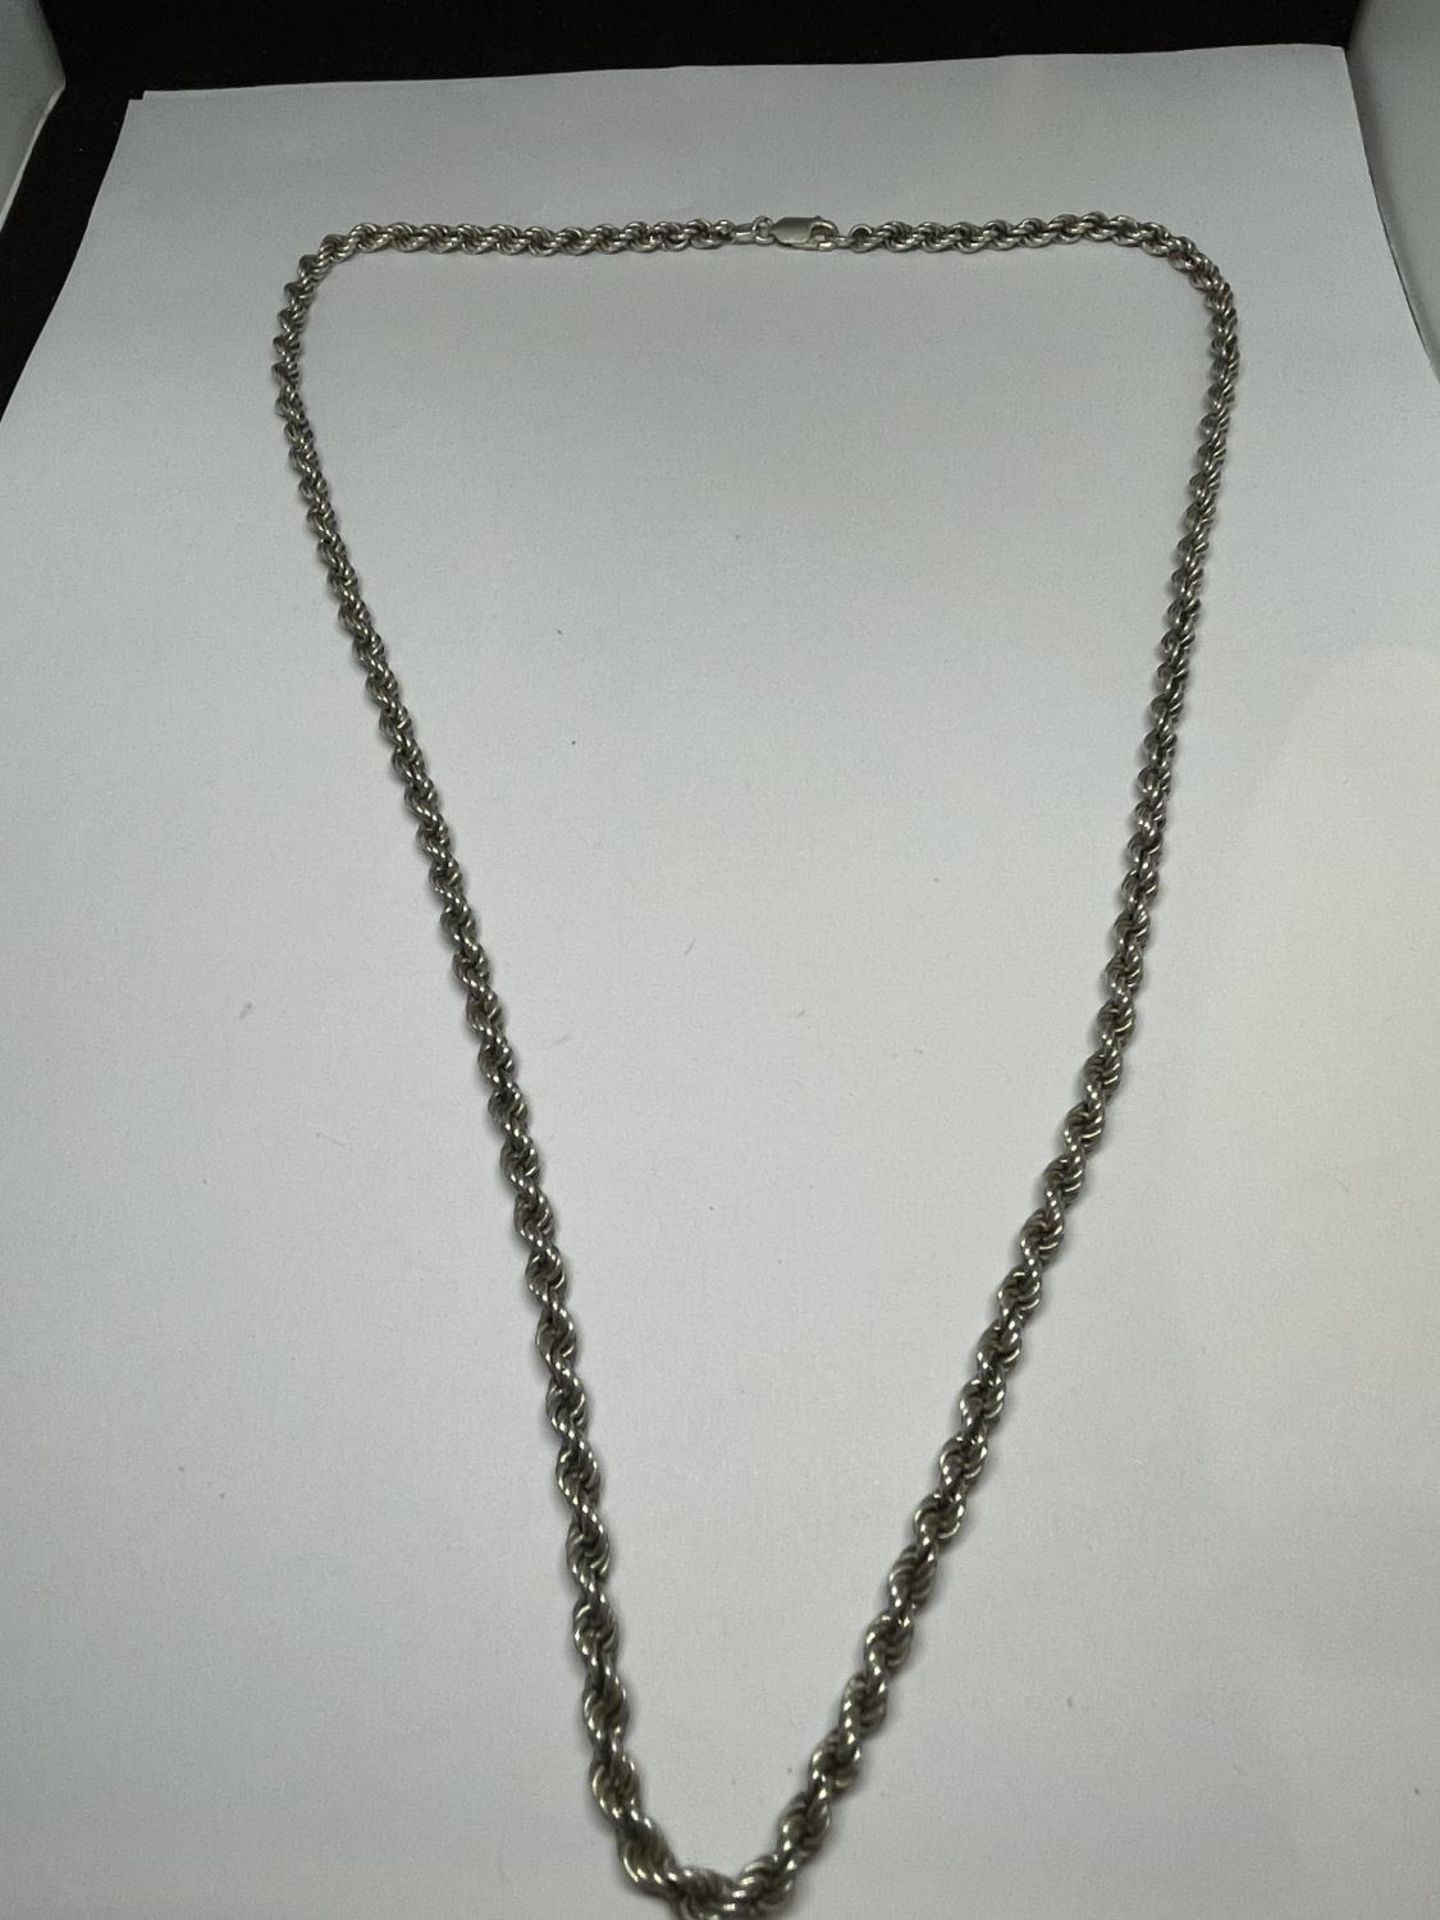 A MARKED SILVER ROPE NECKLACE 60 CM LONG